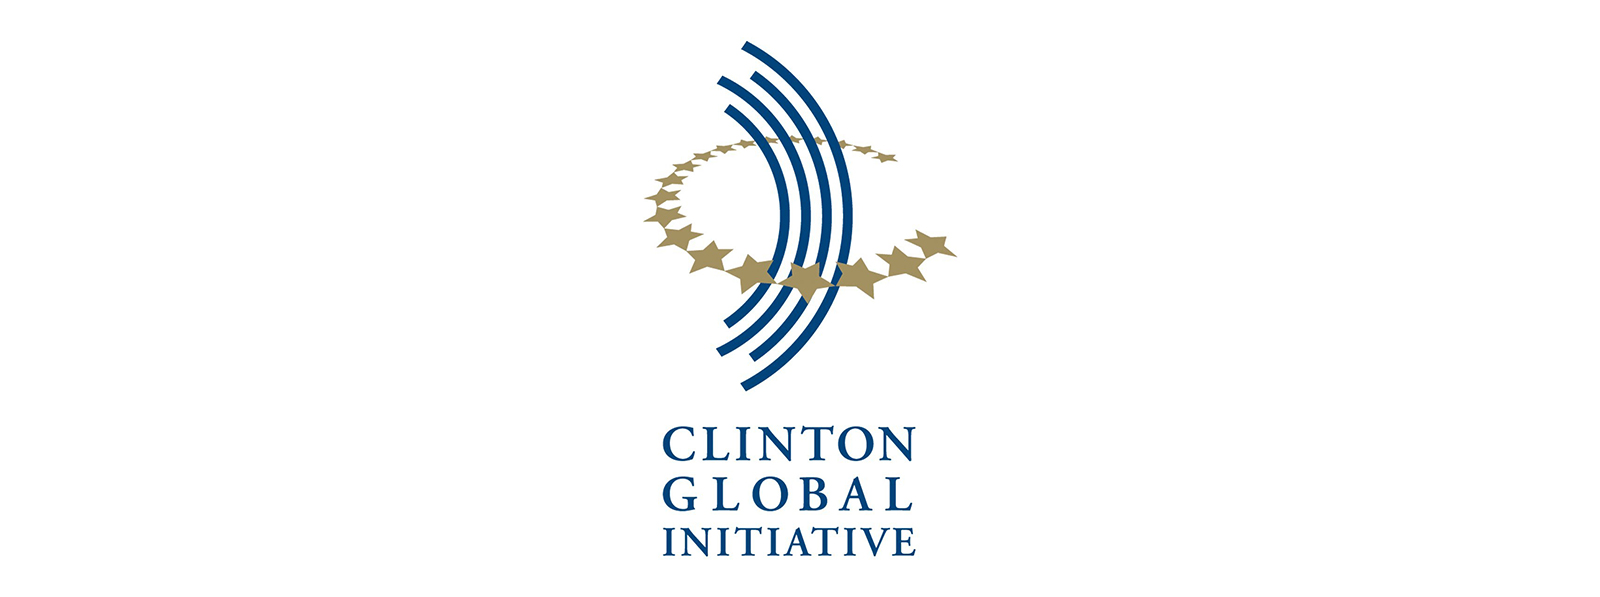 Patricia Lee participates in Clinton Global Initiative – Women in the Green Economy: Promotion and Leadership